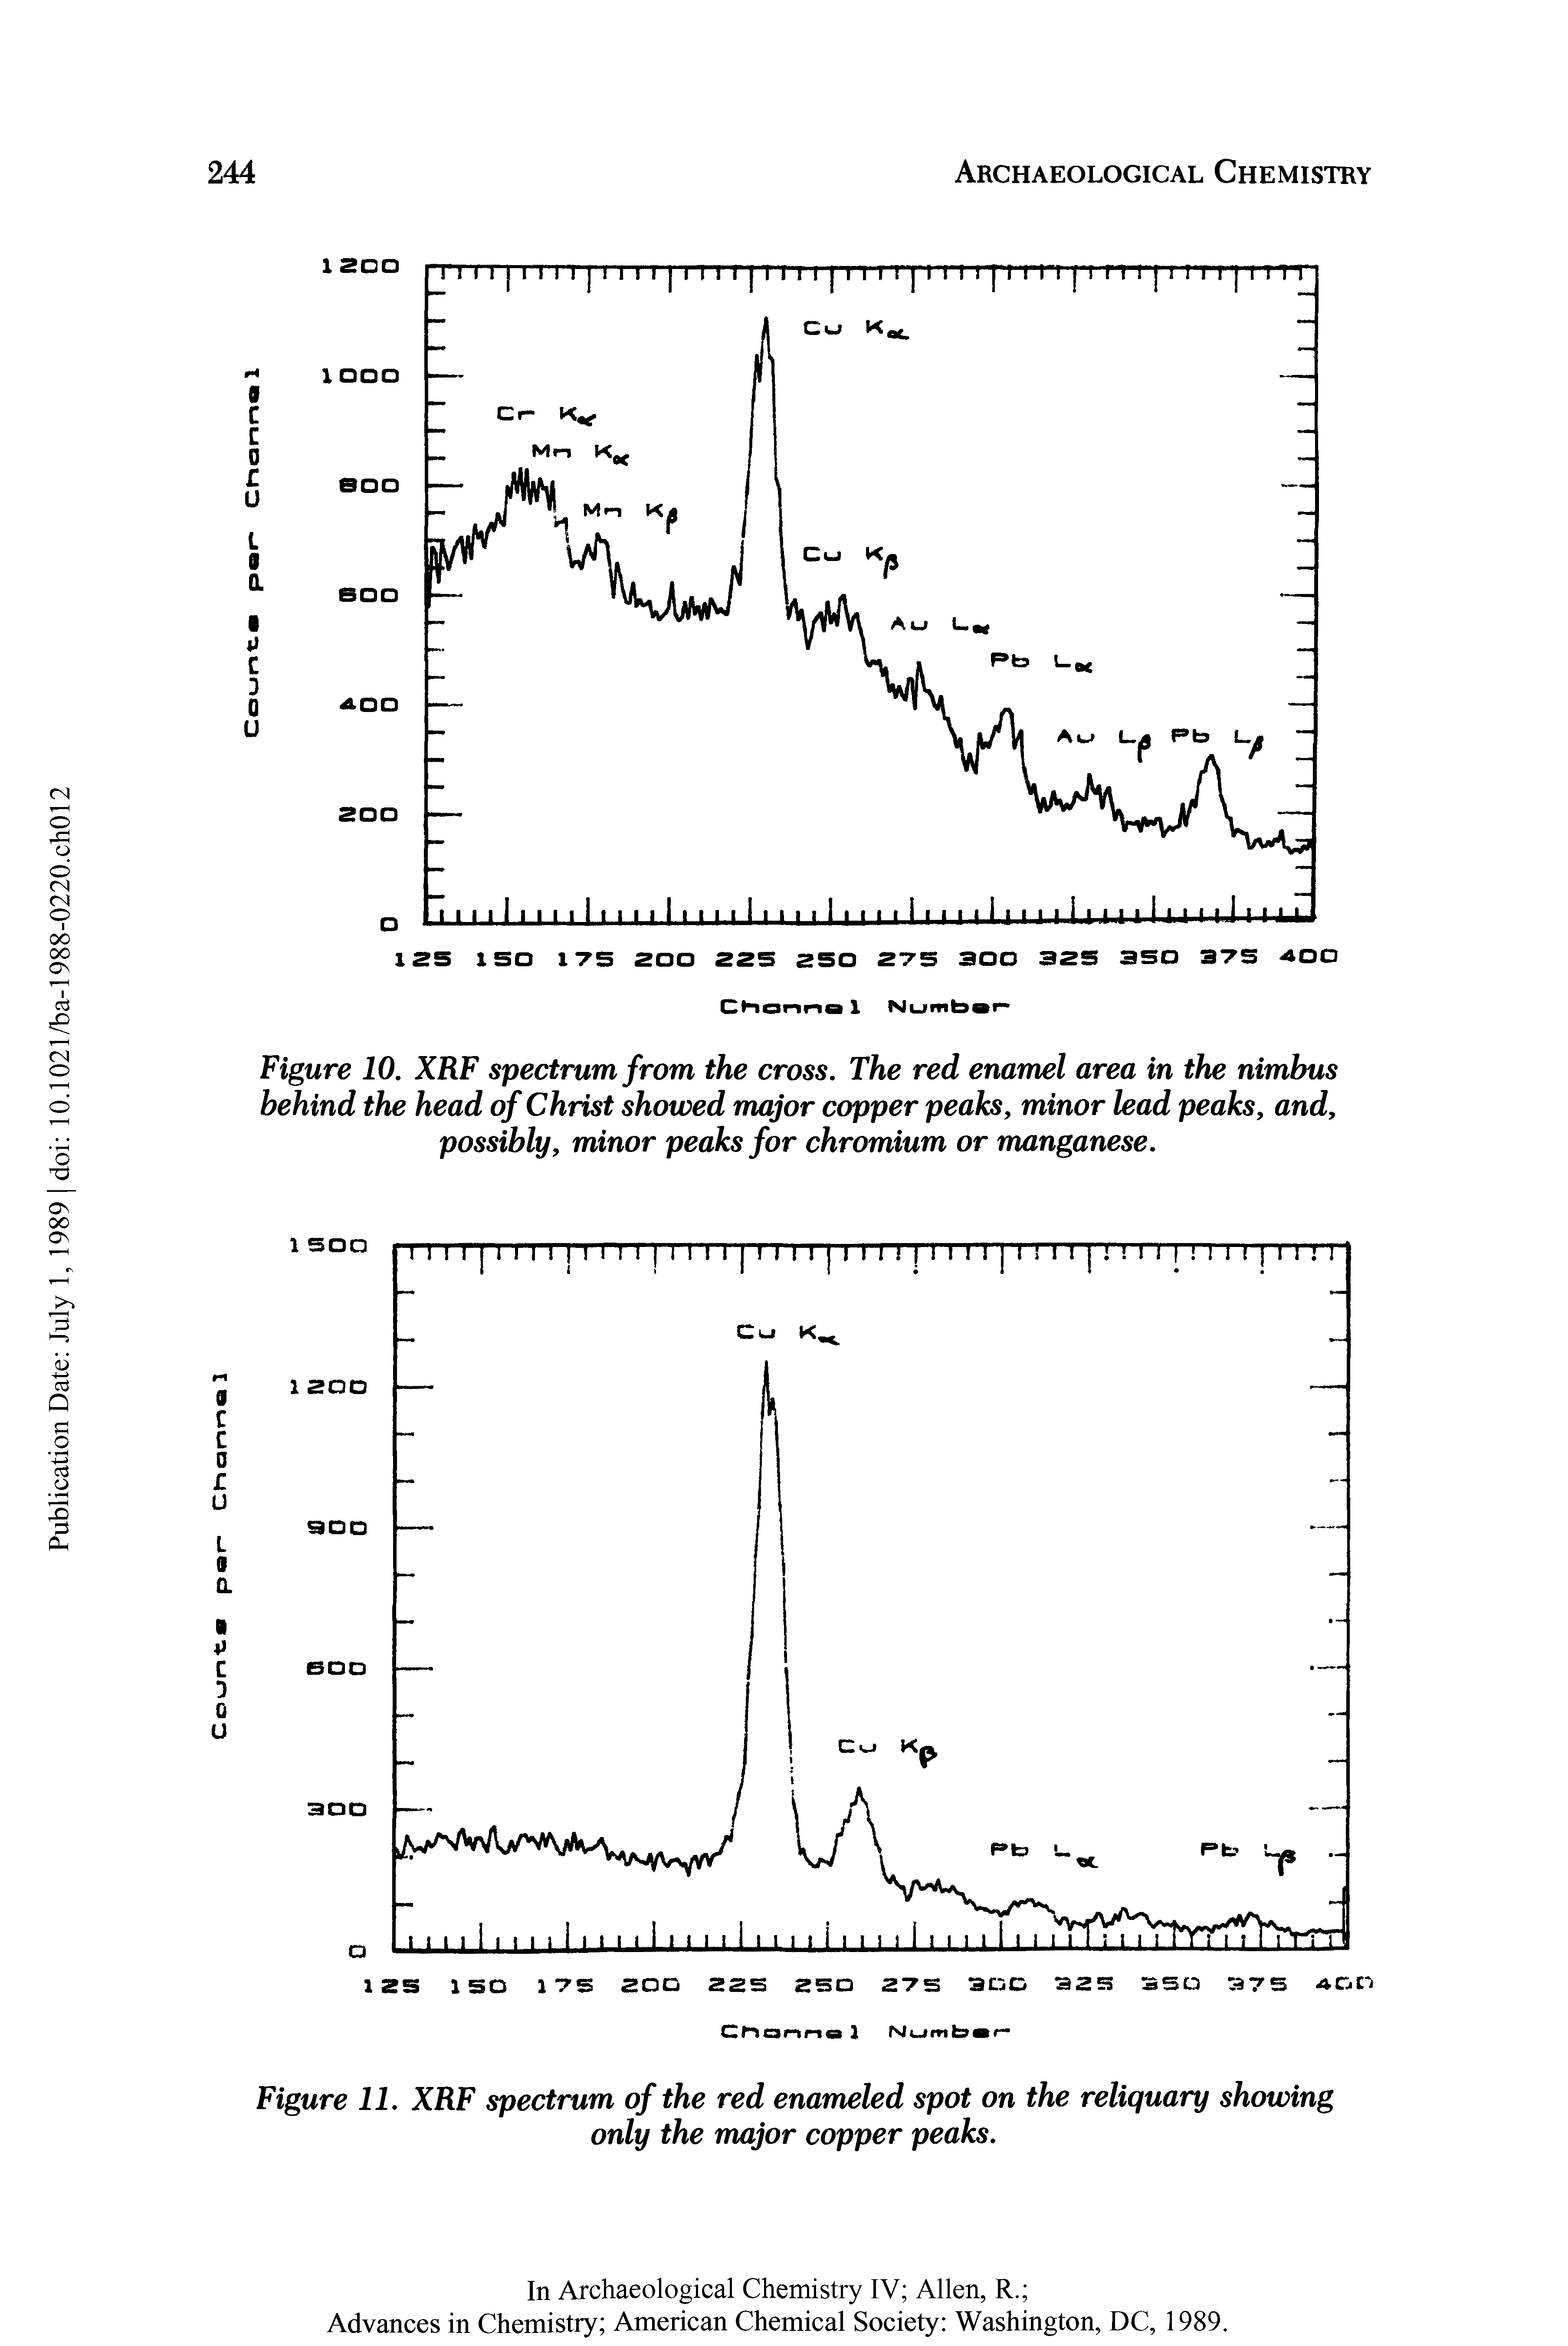 Figure 11. XRF spectrum of the red enameled spot on the reliquary showing only the major copper peaks.